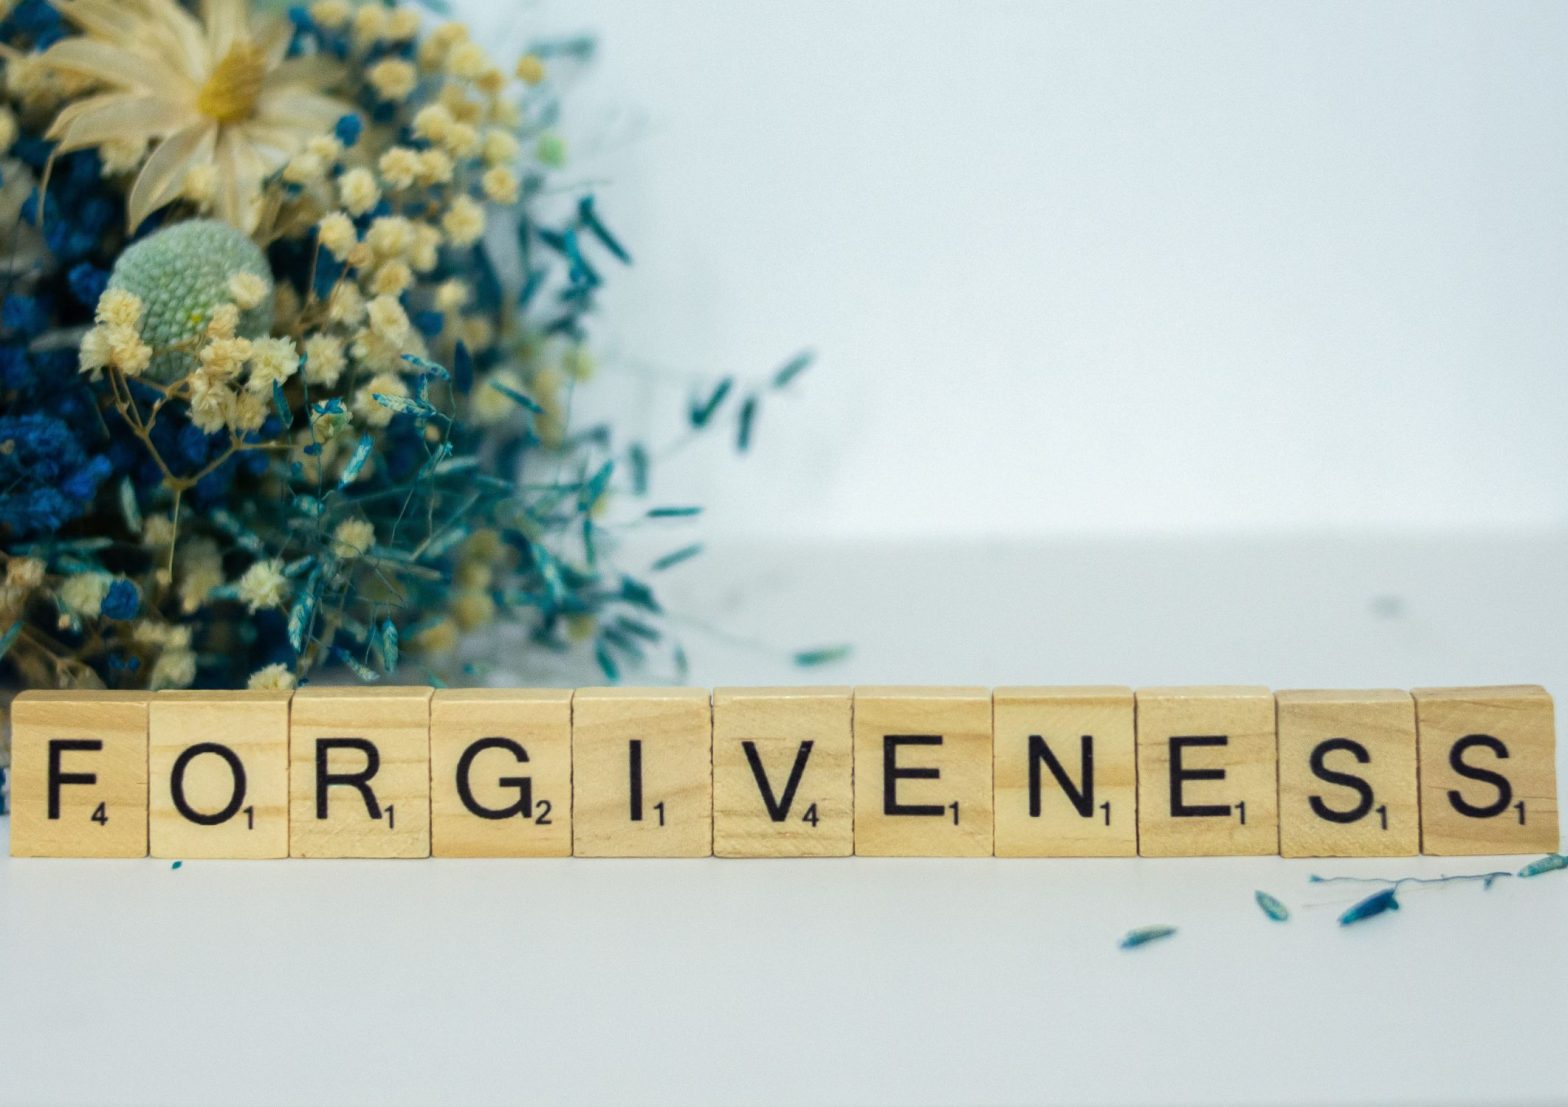 Image shows scrabble letter all lined up spelling the word forgiveness, with a bunch of flowers in the background